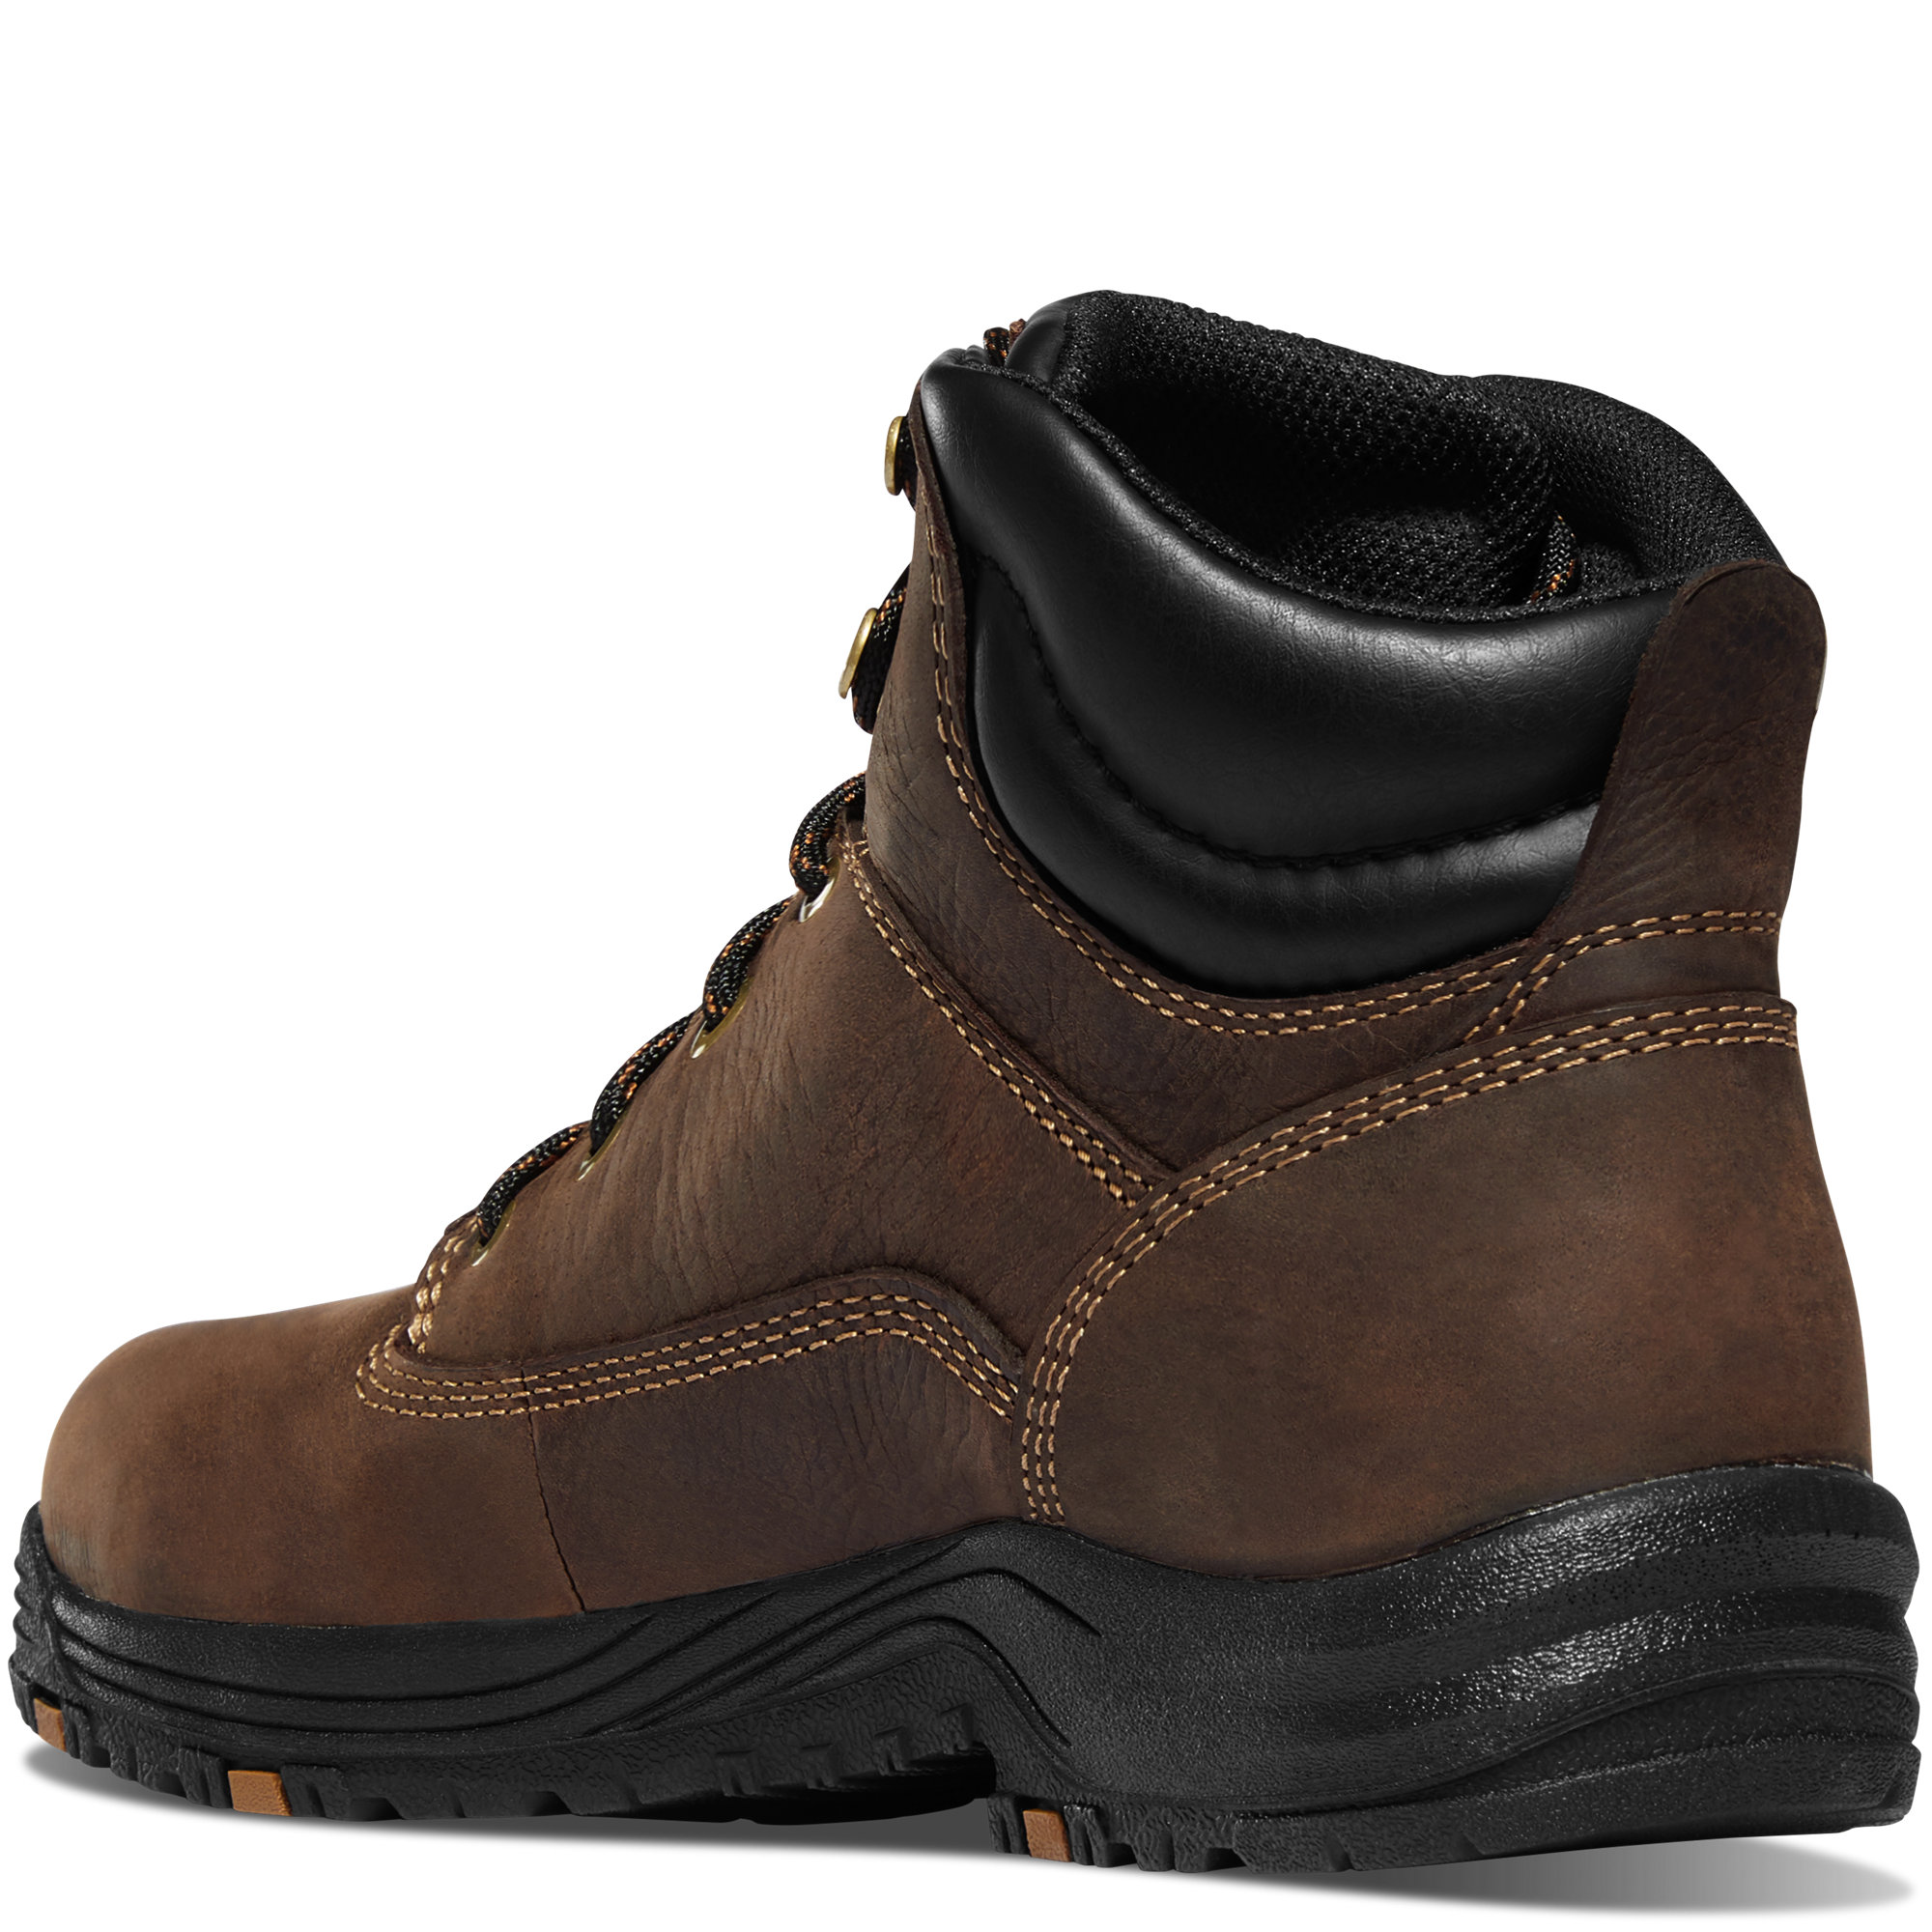 Danner Women's 5-Inch Caliper Work Boots from GME Supply